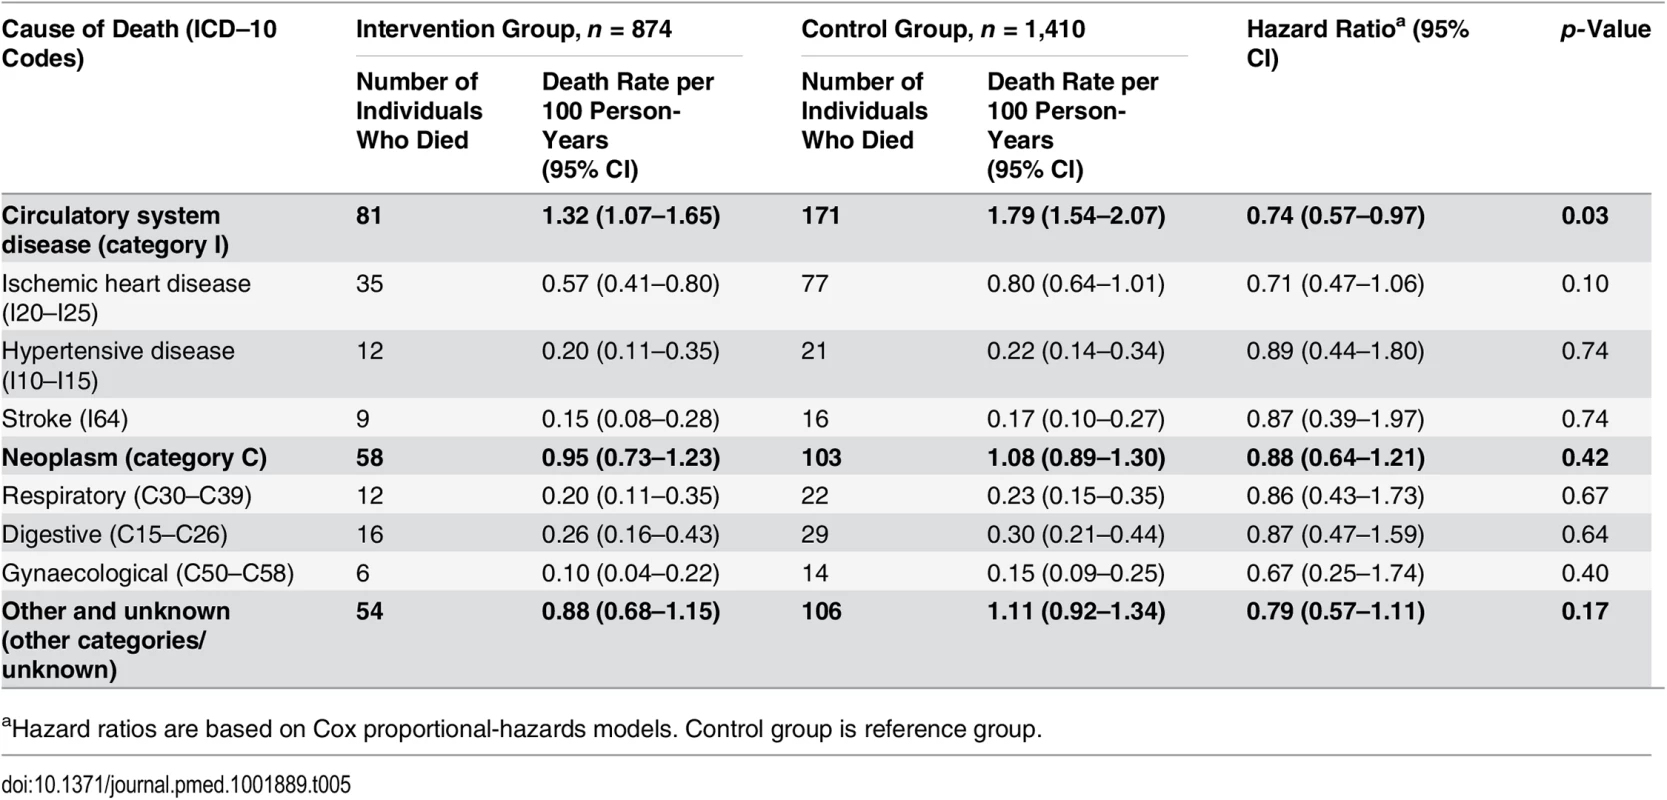 Secondary outcome at 8-y follow-up: mortality rates for main causes and sub-causes of death.